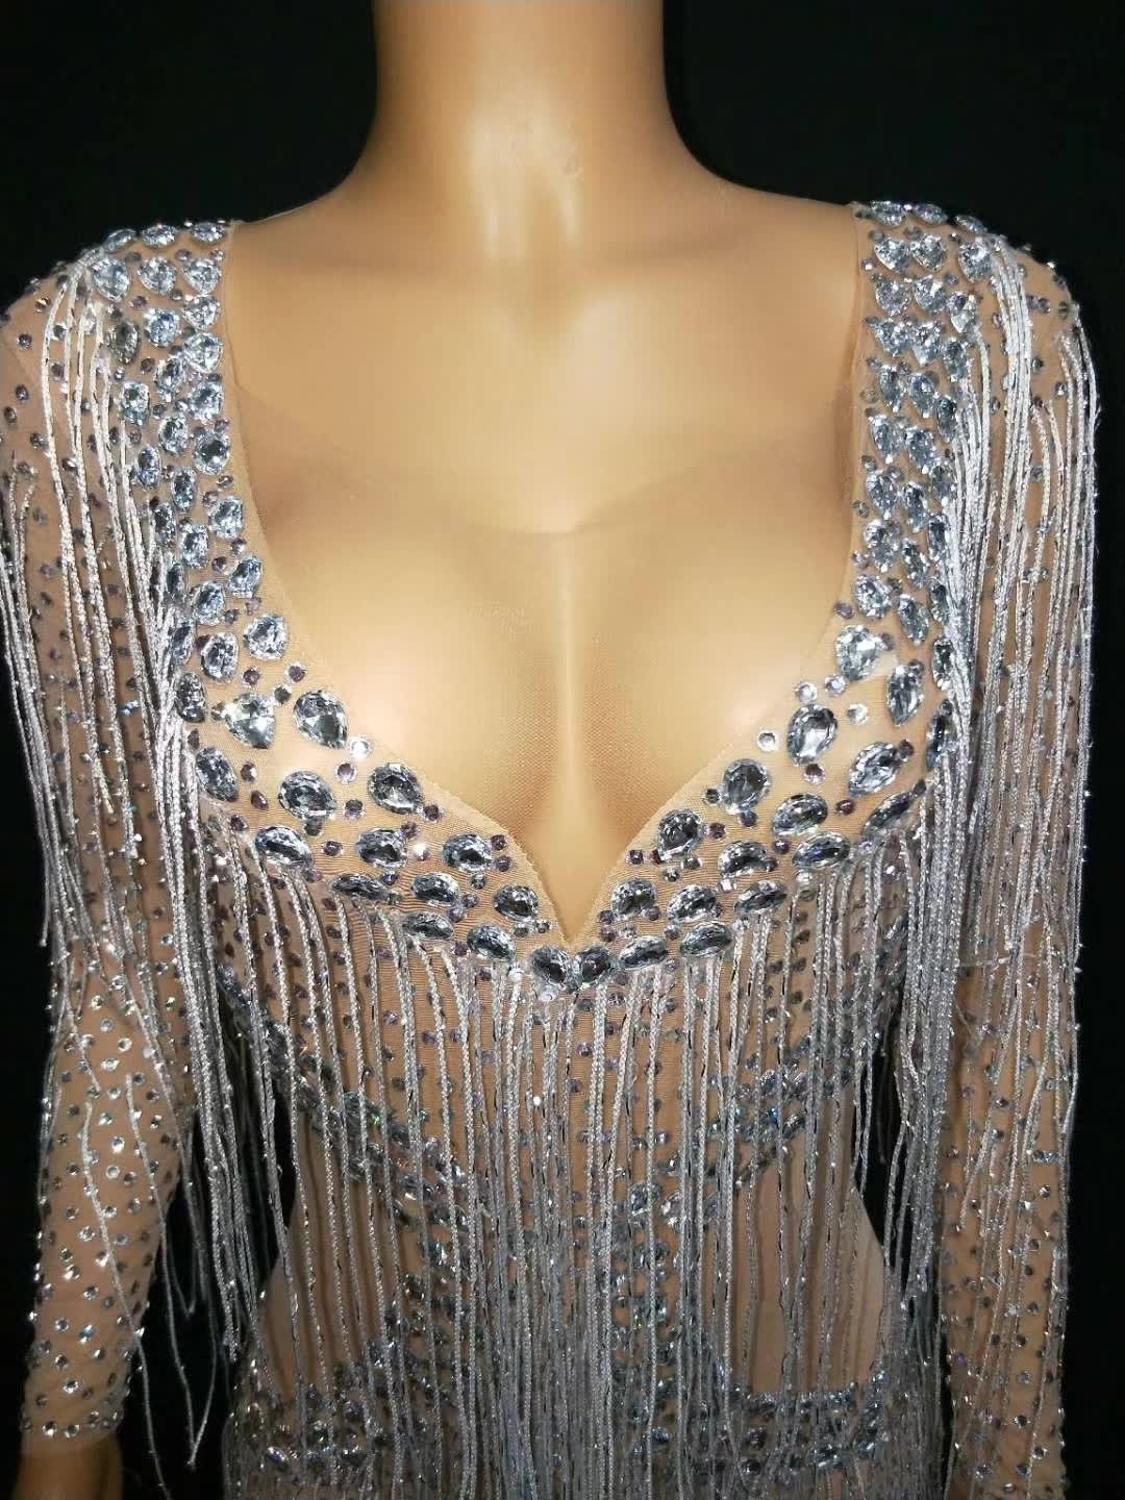 Sparkly Crystals Sequined Dress Fashion Closet Clothing